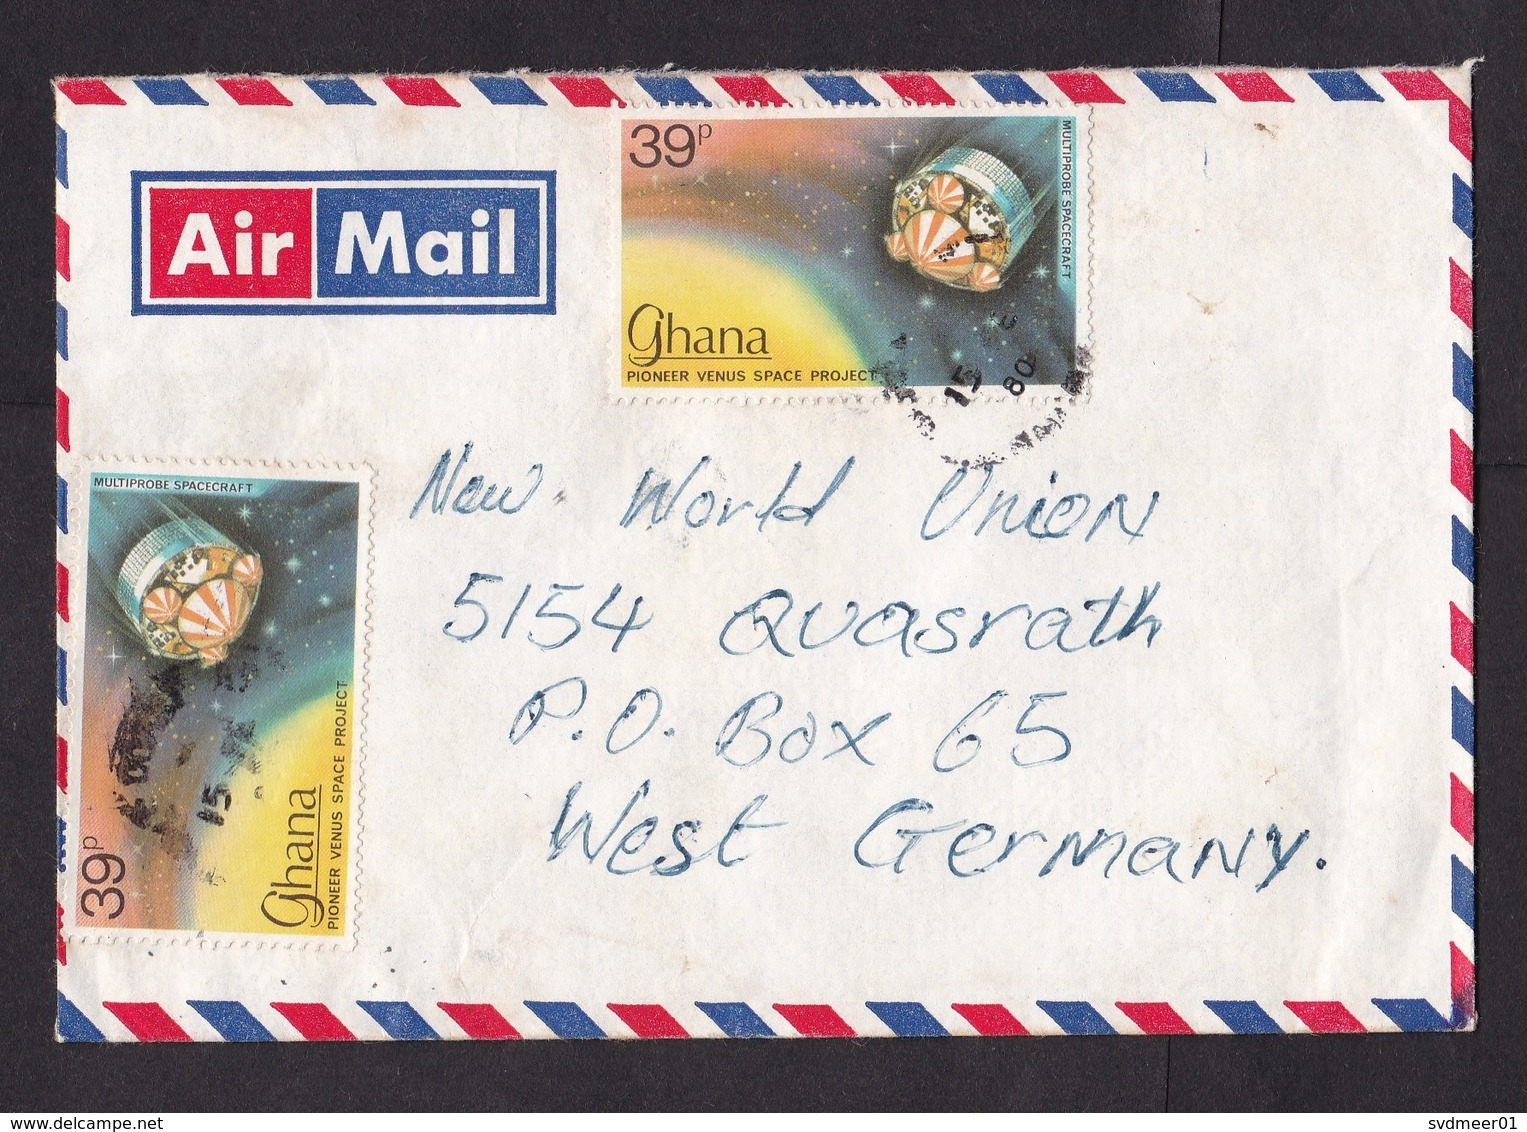 Ghana: Airmail Cover To Germany, 1980, 4 Stamps, Pioneer Venus Space Project, Corn, Food (discolouring) - Ghana (1957-...)